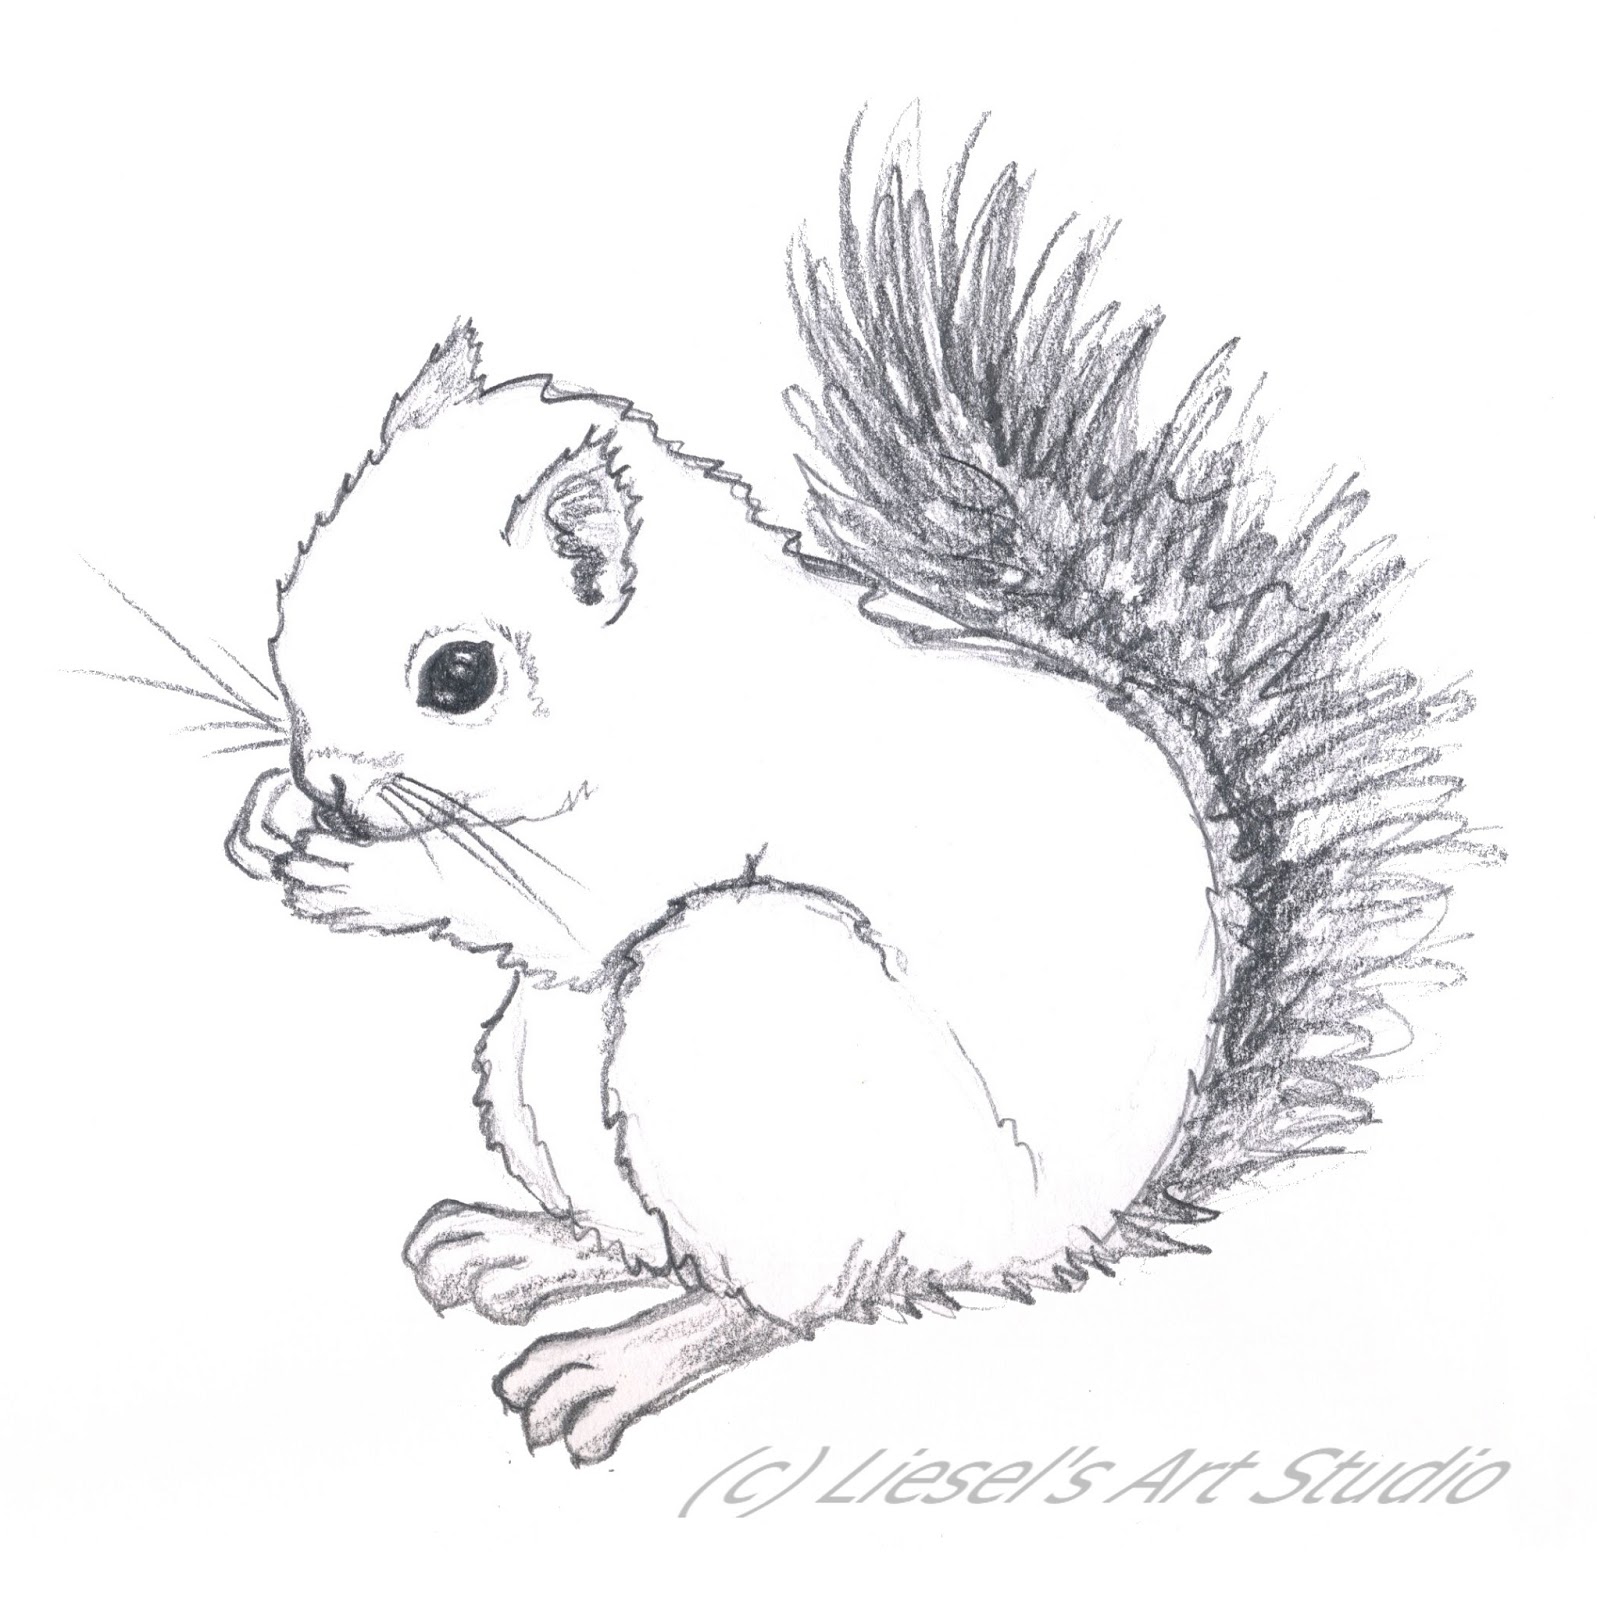 Rampant Eclecticism: #365 Drawings: Squirrel 19/365